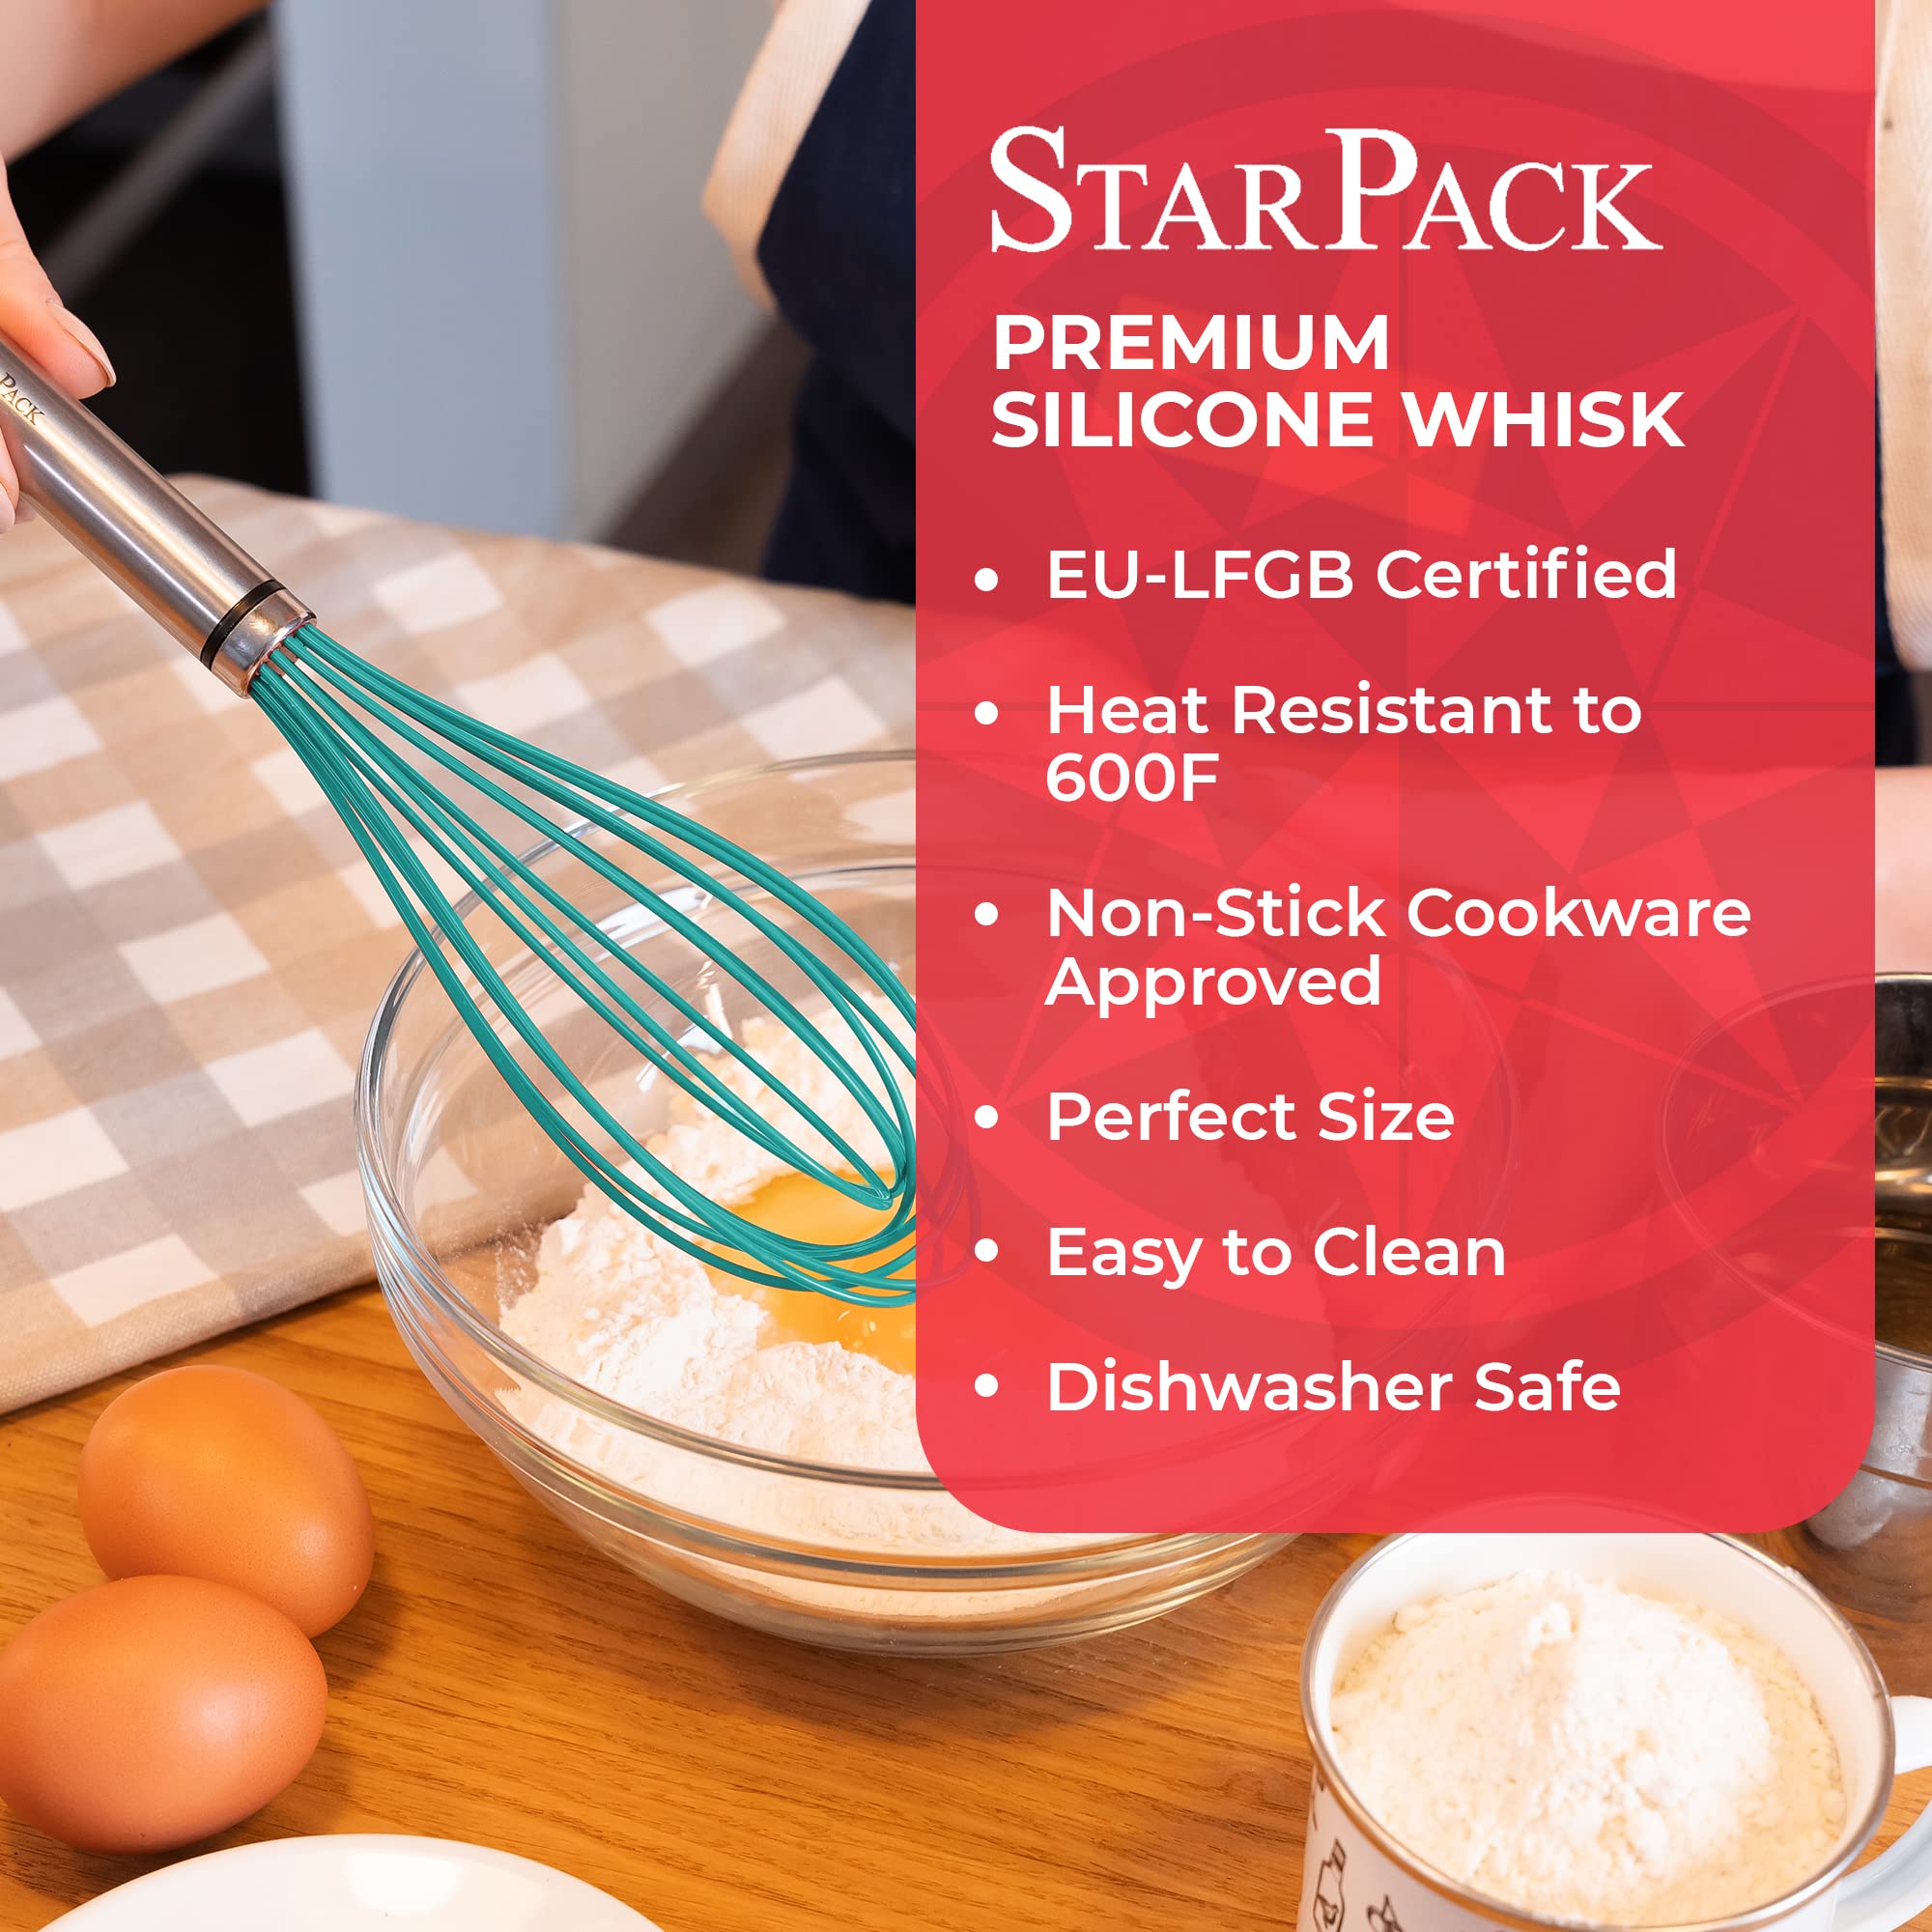 StarPack Home StarPack Premium Silicone Whisks for Cooking - Whisk Silicone Material with High Heat Resistance of 600°F - Non-Stick Kitchen Wh